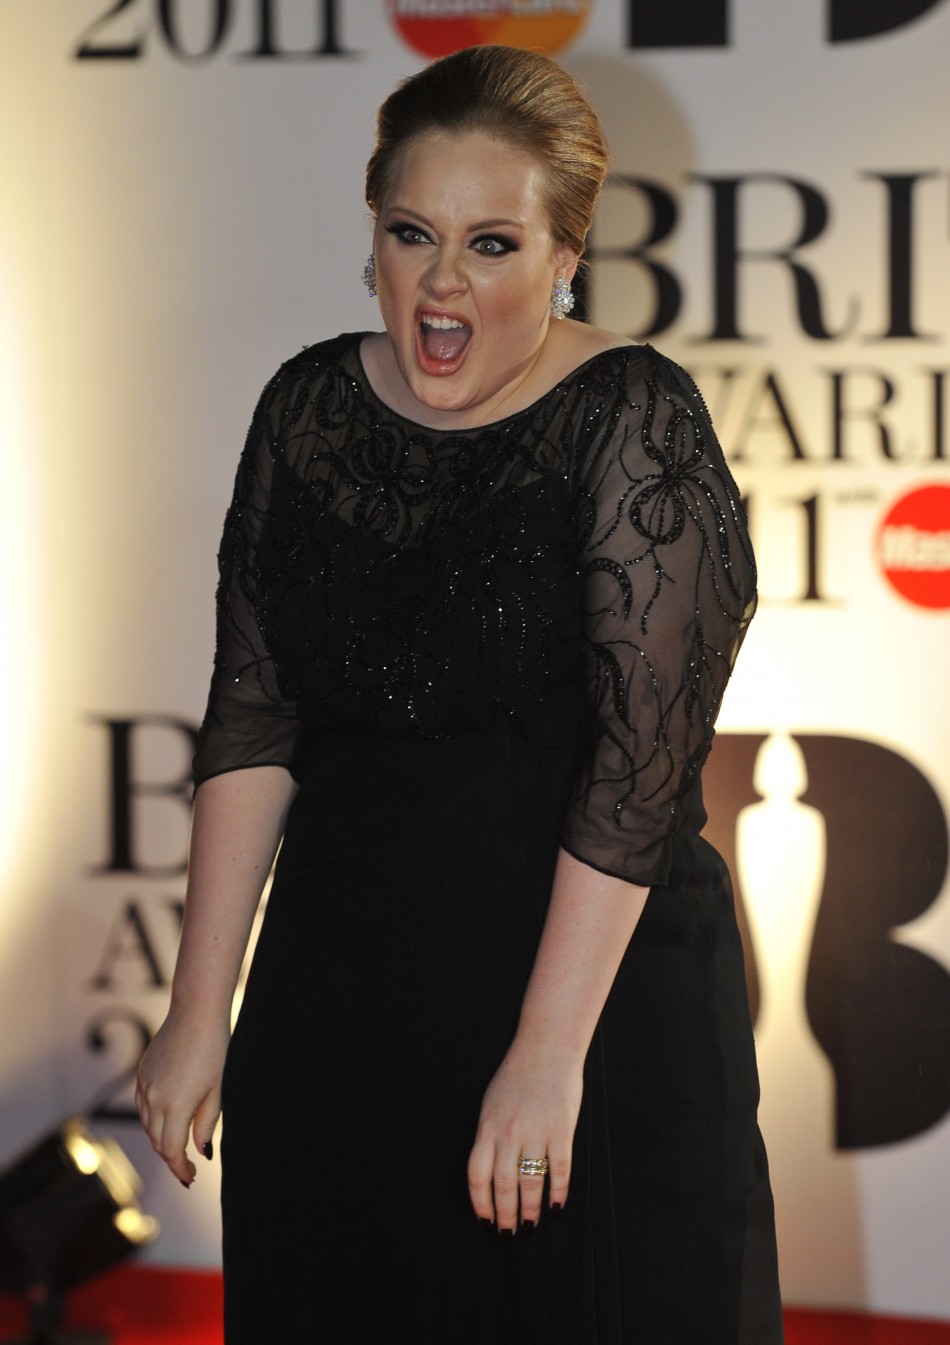 Adele Adkins poses for photographers at the BRIT music awards at the O2 Arena in London